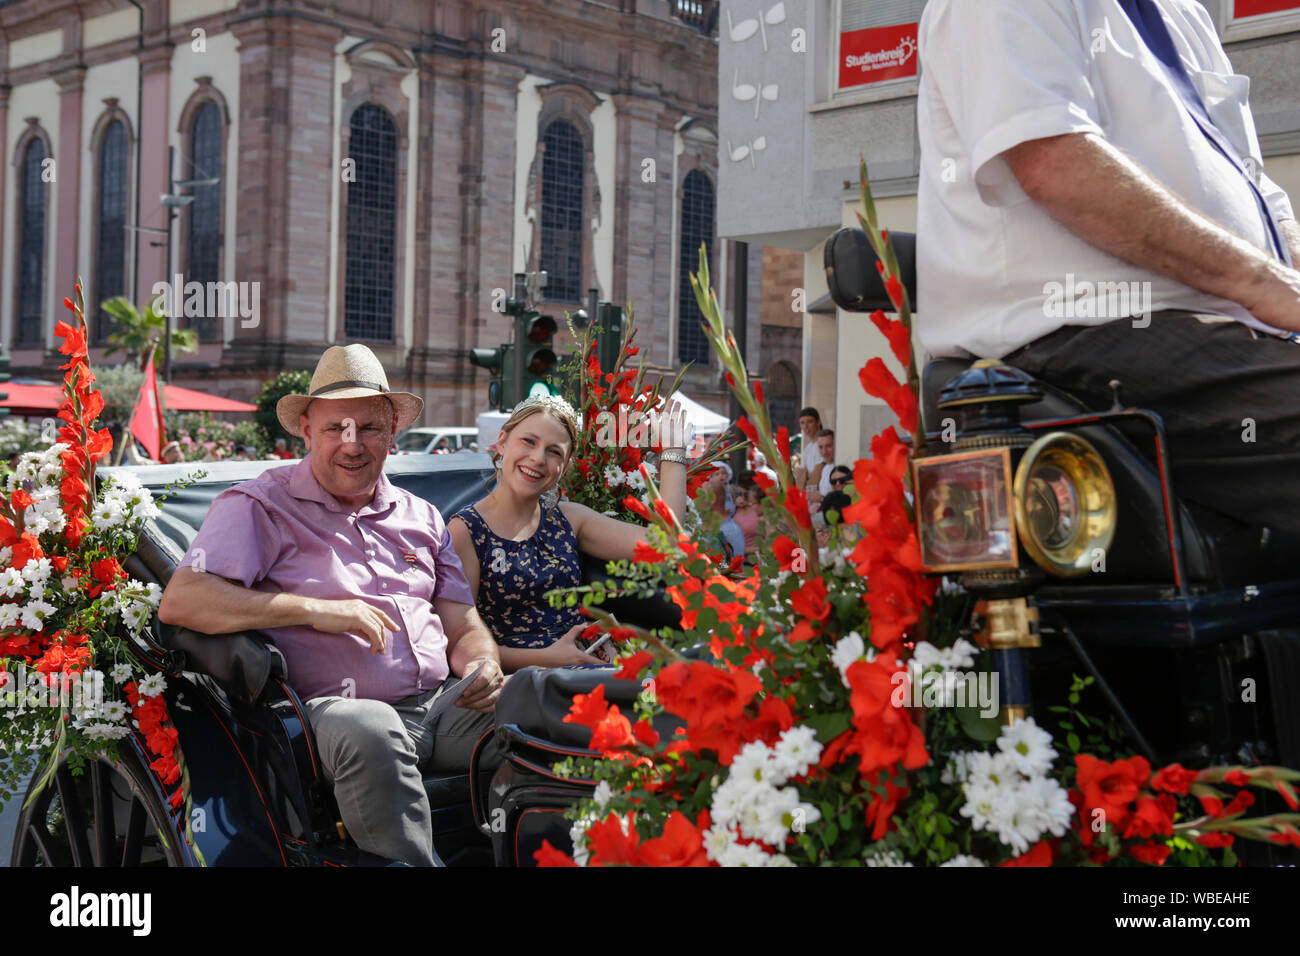 Worms, Germany. 25th August 2019. The Lord Mayor of Worms, Adolf Kessel, and the Rhine-Hessian wine queen Anna Göhring ride in an open horse-drawn carriage in the parade, waving to the crowd. The first highlight of the 2019 Backfischfest was the big parade through the city of Worms with over 70 groups and floats. Community groups, music groups and businesses from Worms and further afield took part. Stock Photo